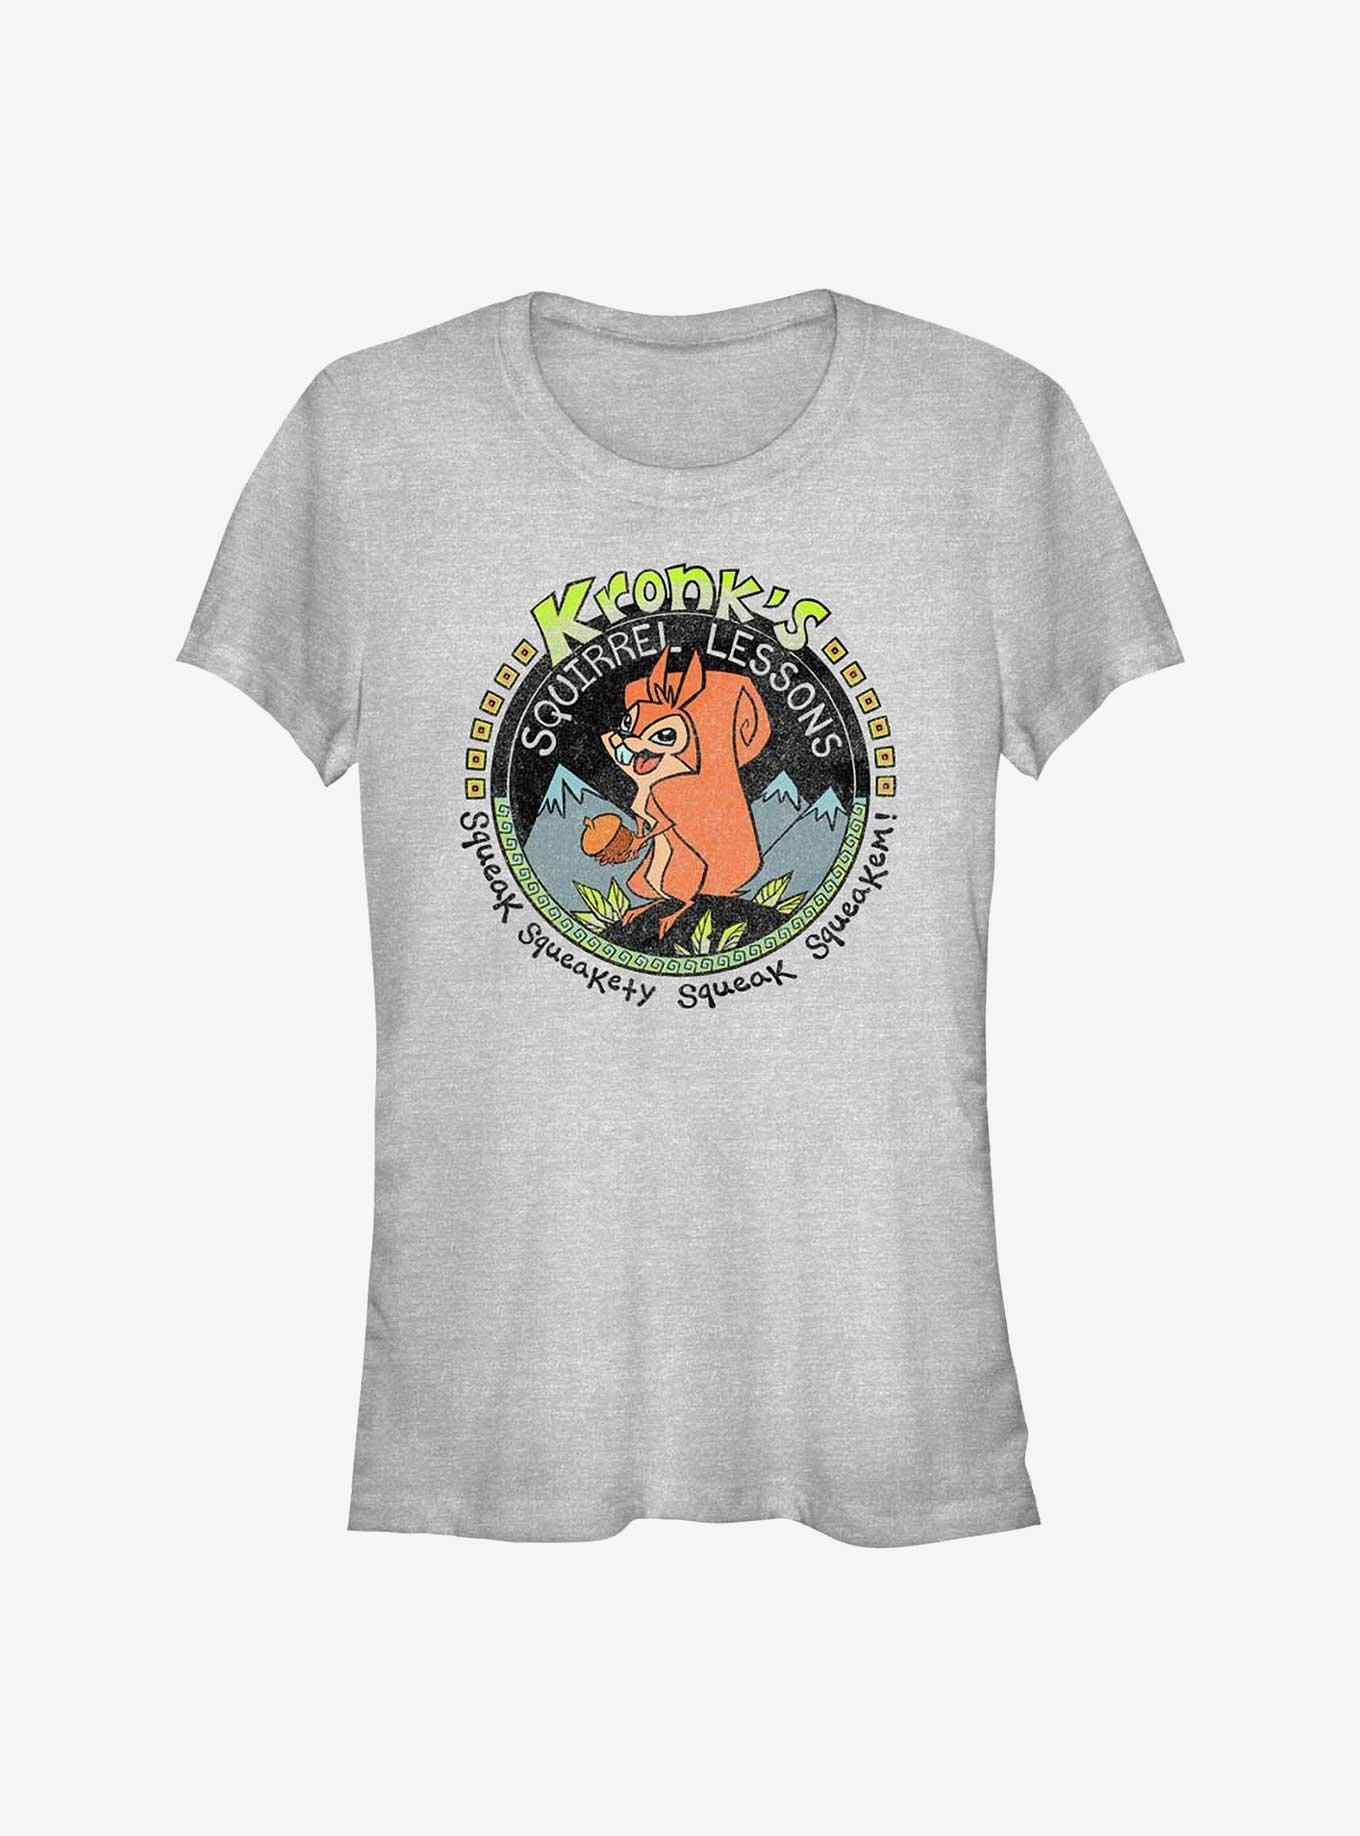 Disney The Emperor's New Groove Kronk's Squirrel Lessons Girls T-Shirt